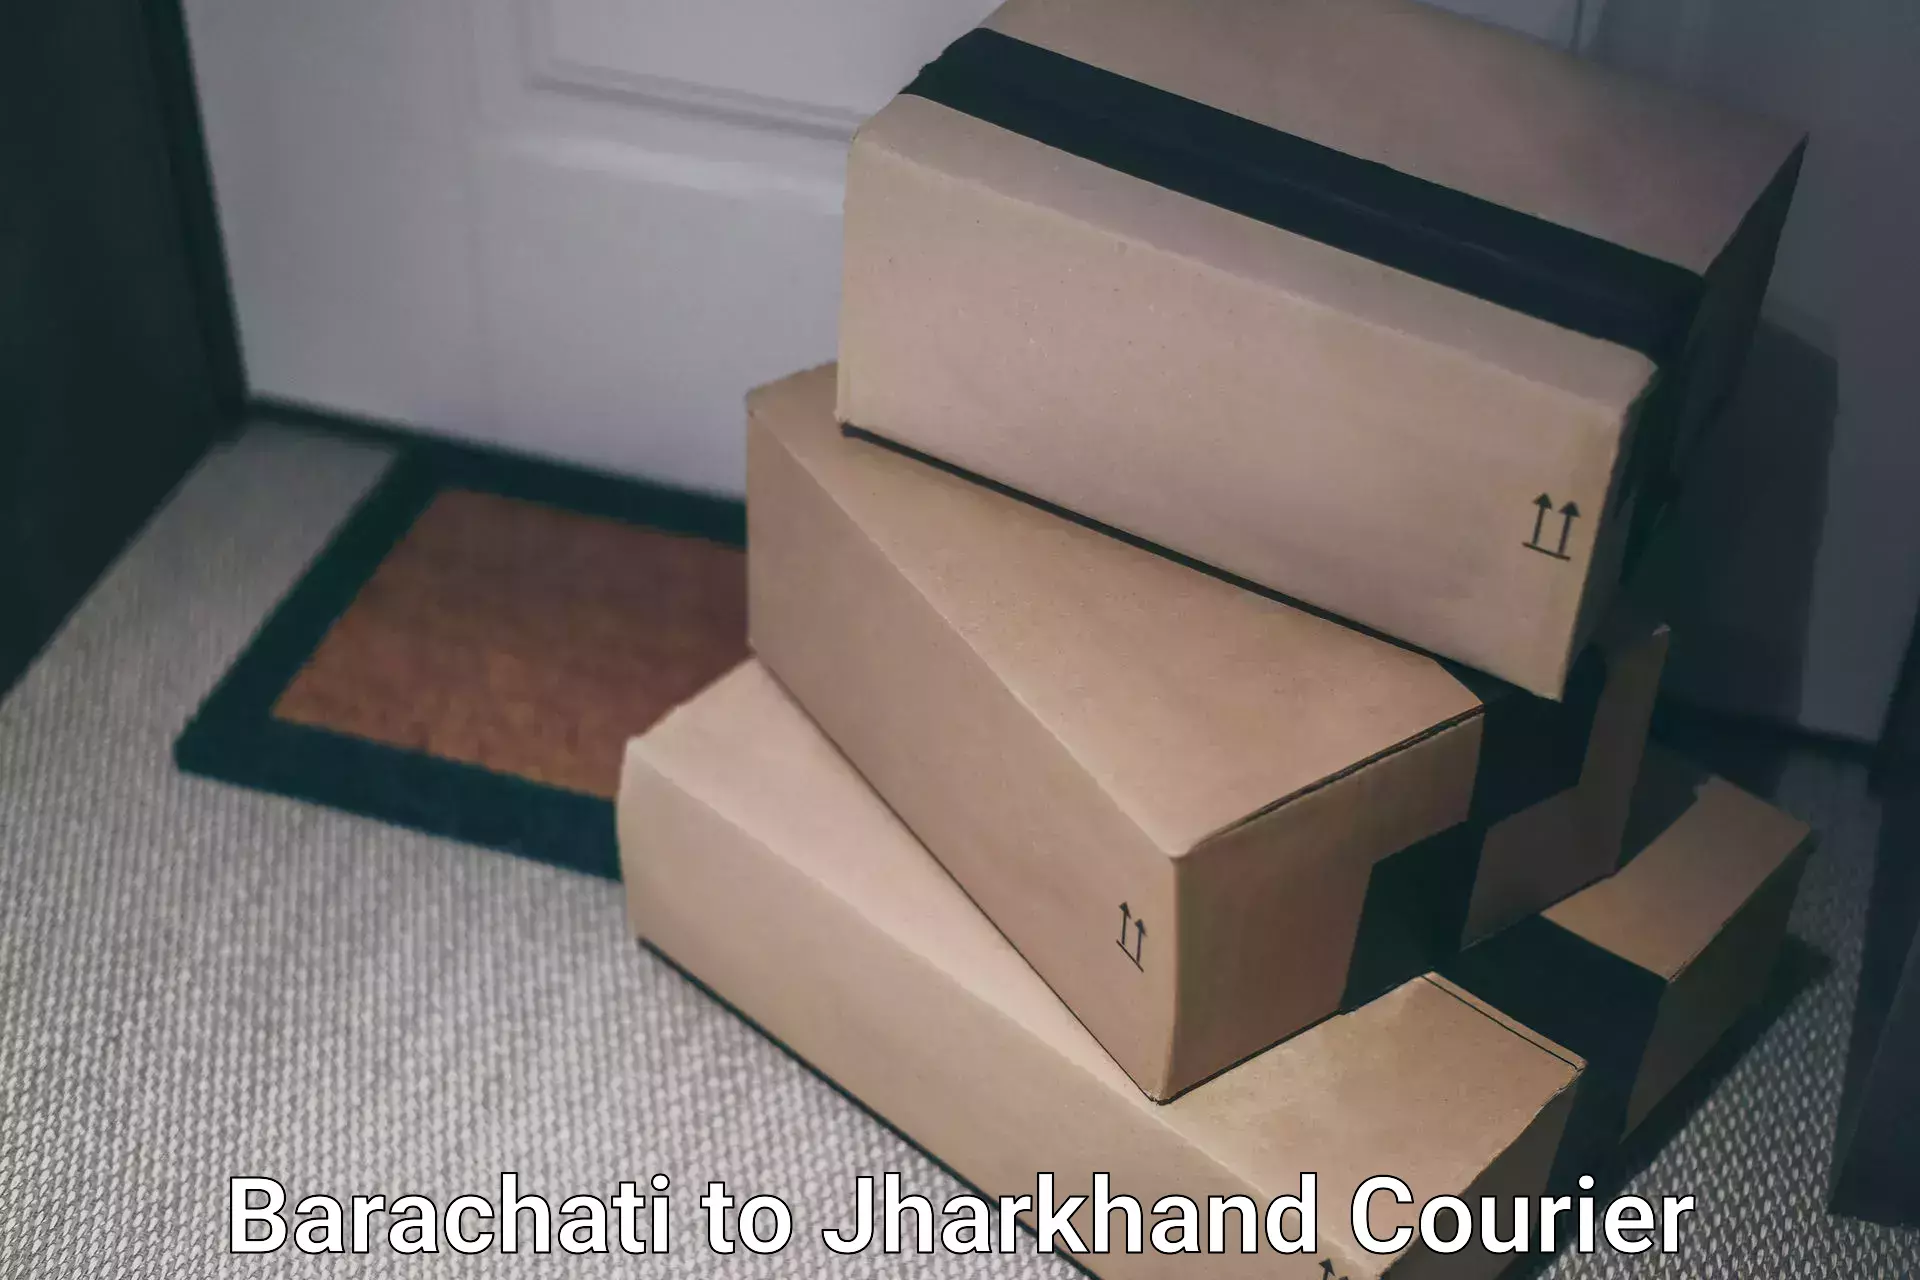 Multi-national courier services Barachati to Padma Hazaribagh